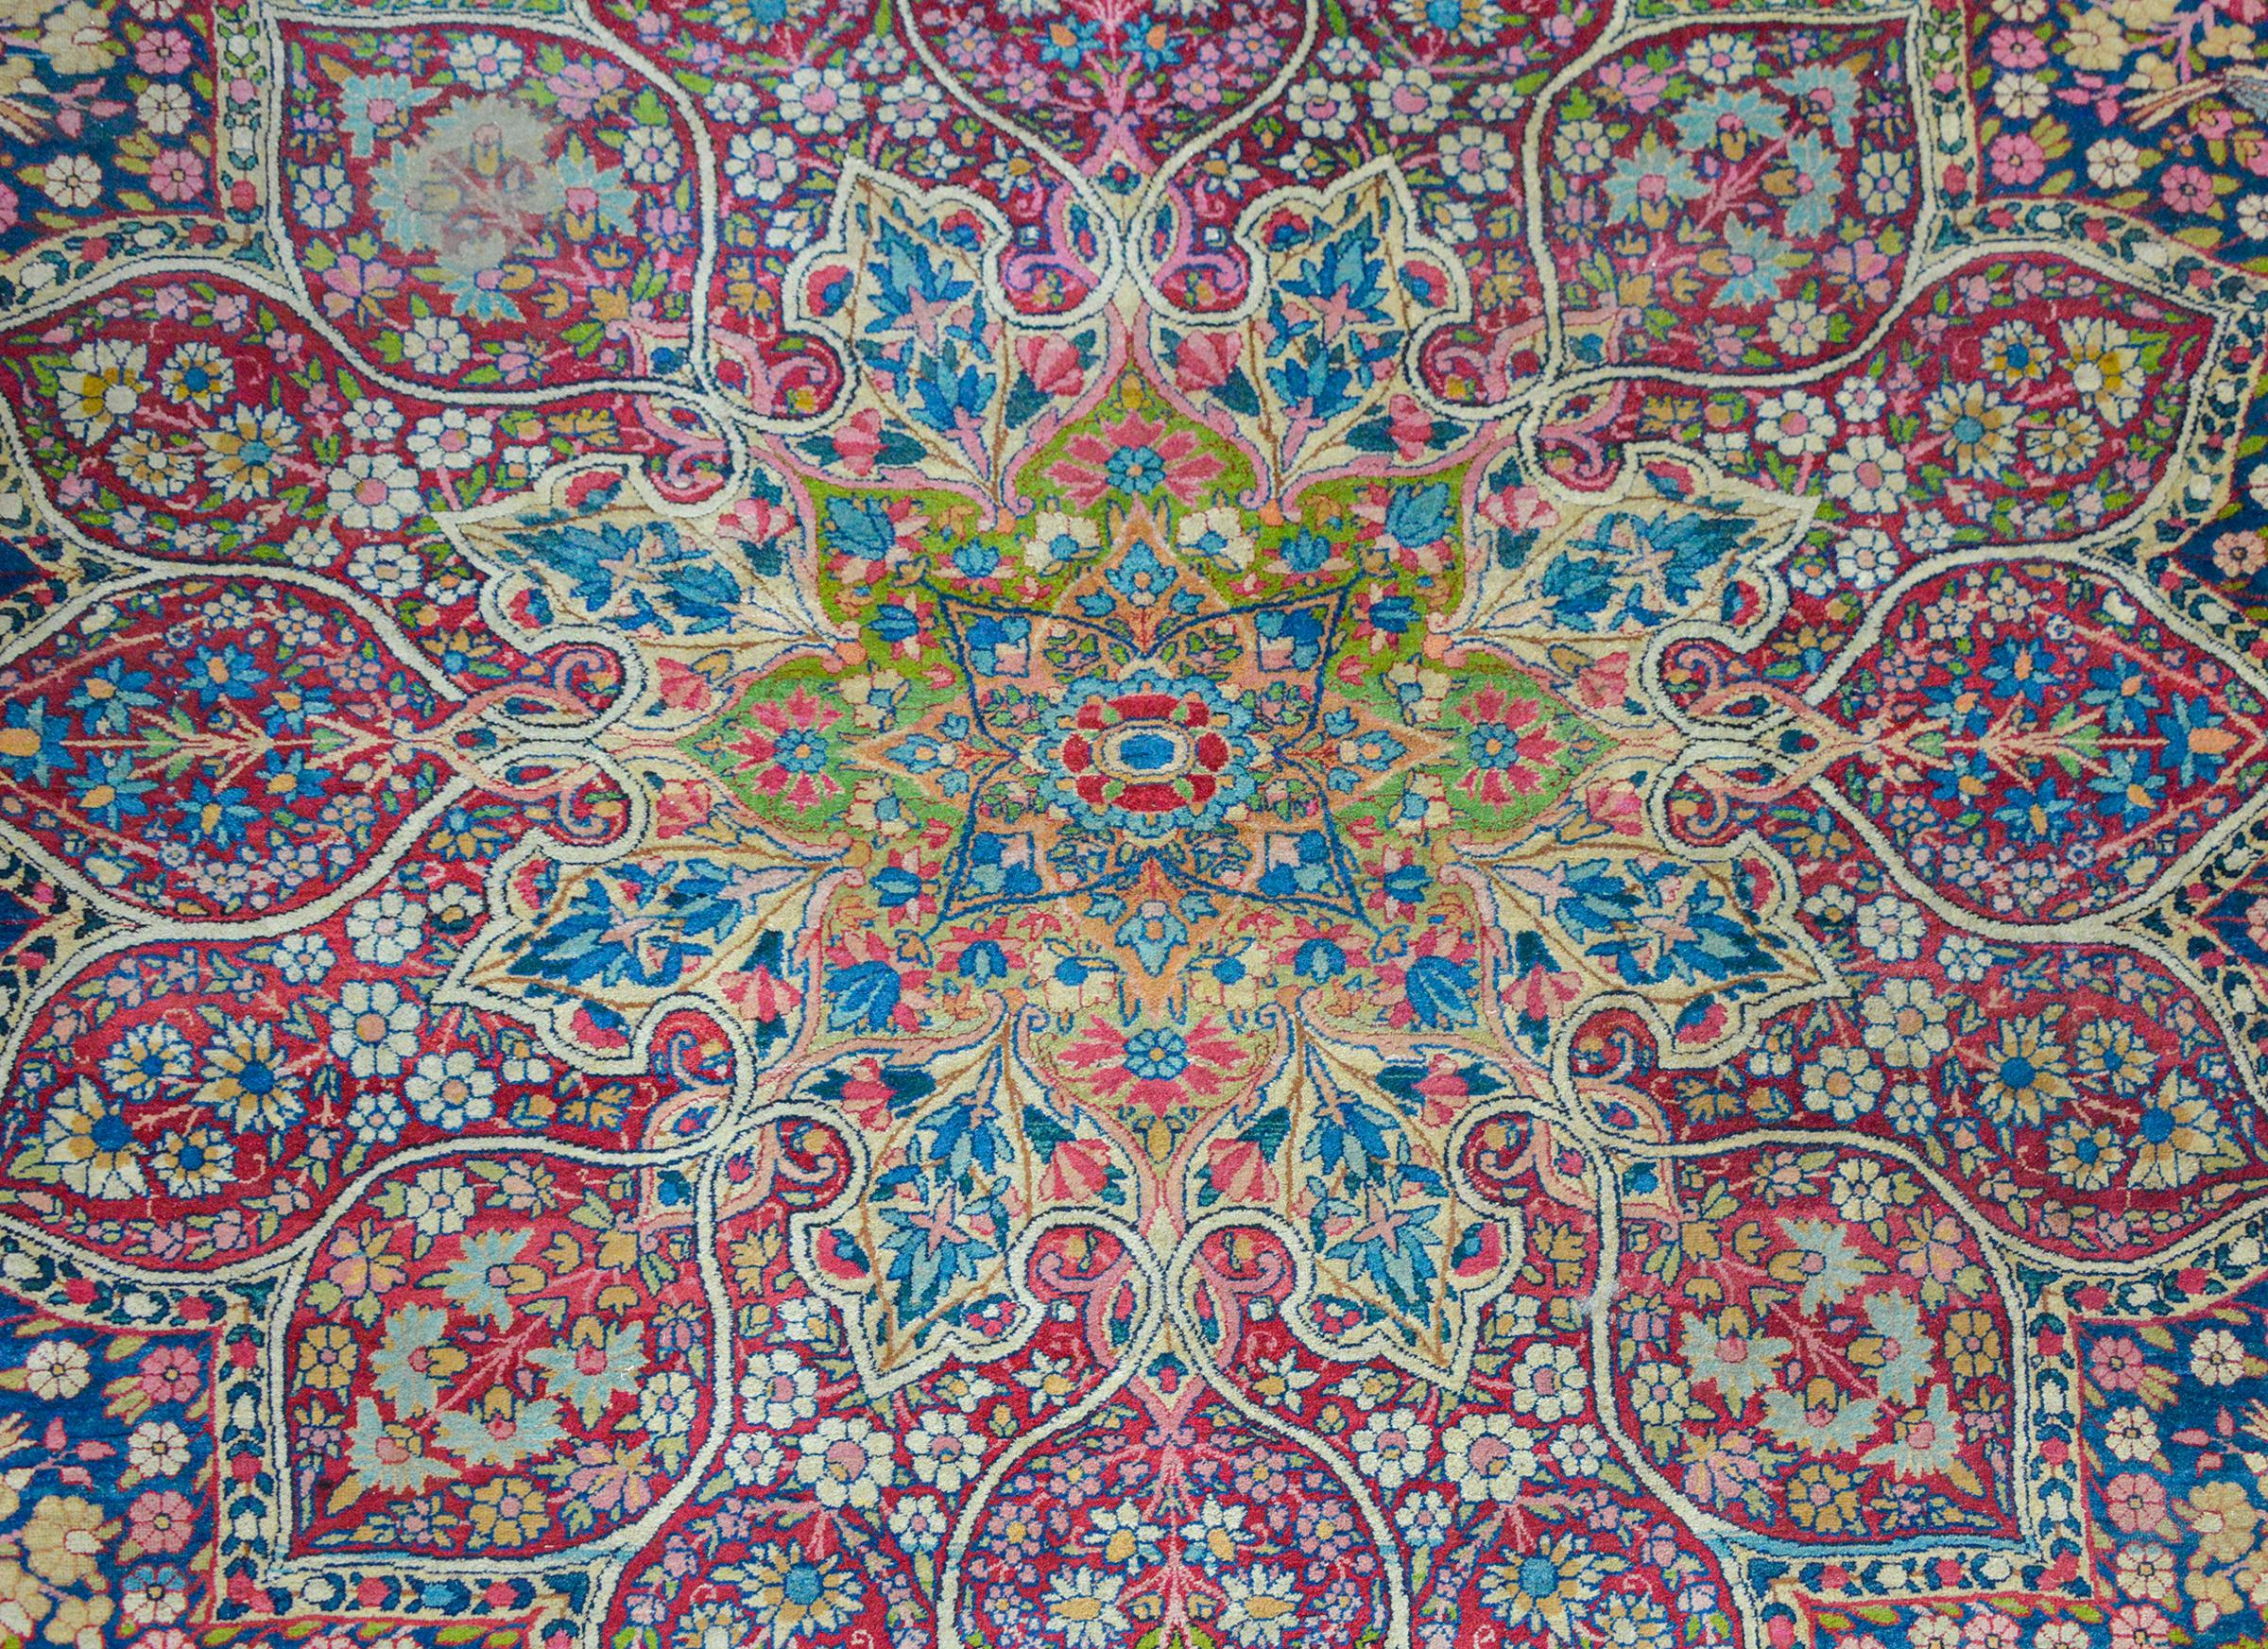 An outstanding early 20th century Persian Lavar Kirman rug with a mesmerizing pattern reminiscent of a stained-glass window woven with bold pinks, blues, reds, greens, and golds, amidst a field of scrolling vines and flowers and all set against a